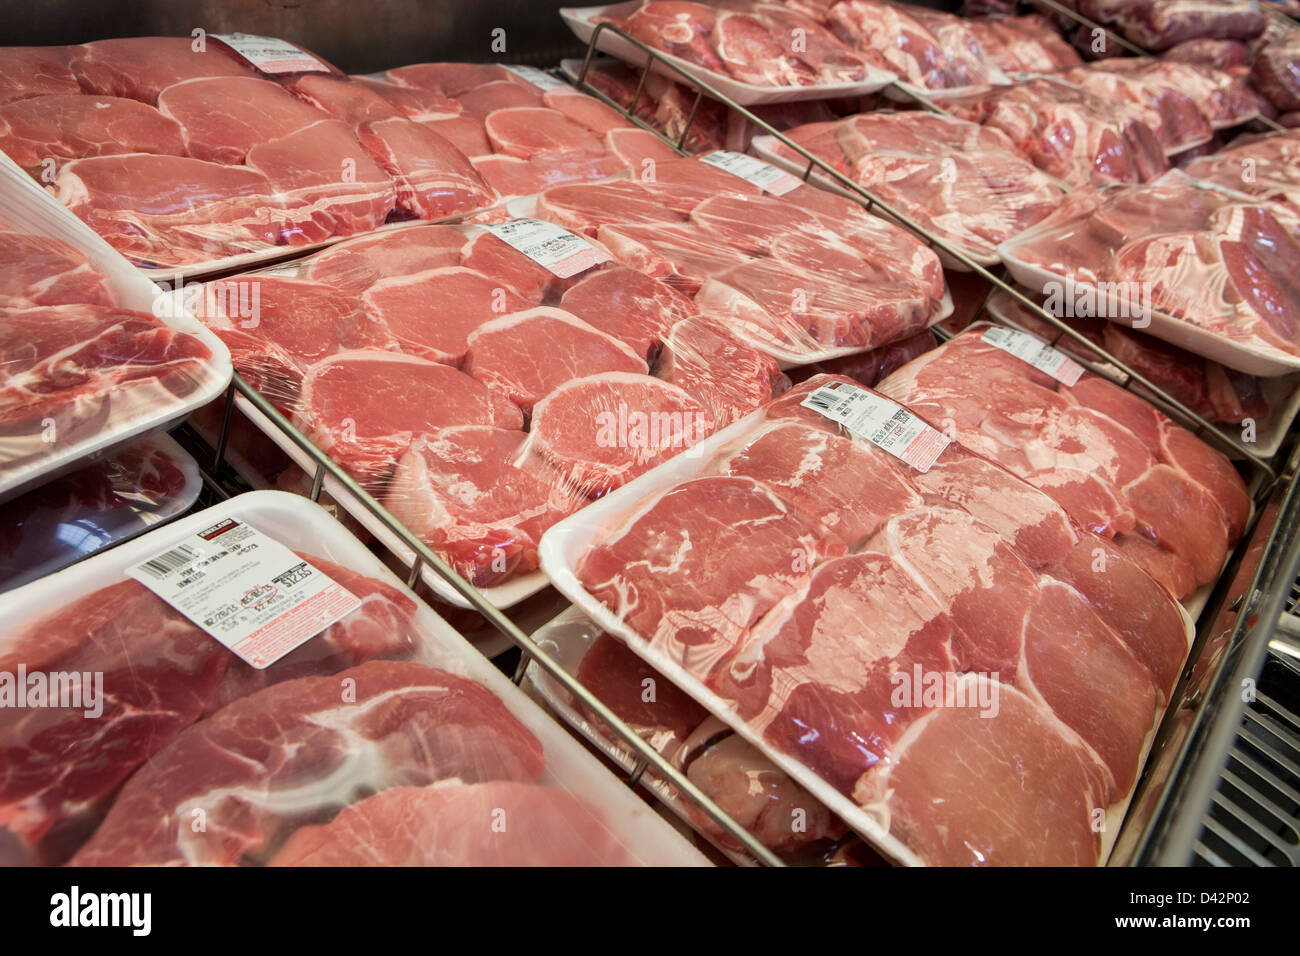 Pork products on display at a Costco Wholesale Warehouse Club. Stock Photo